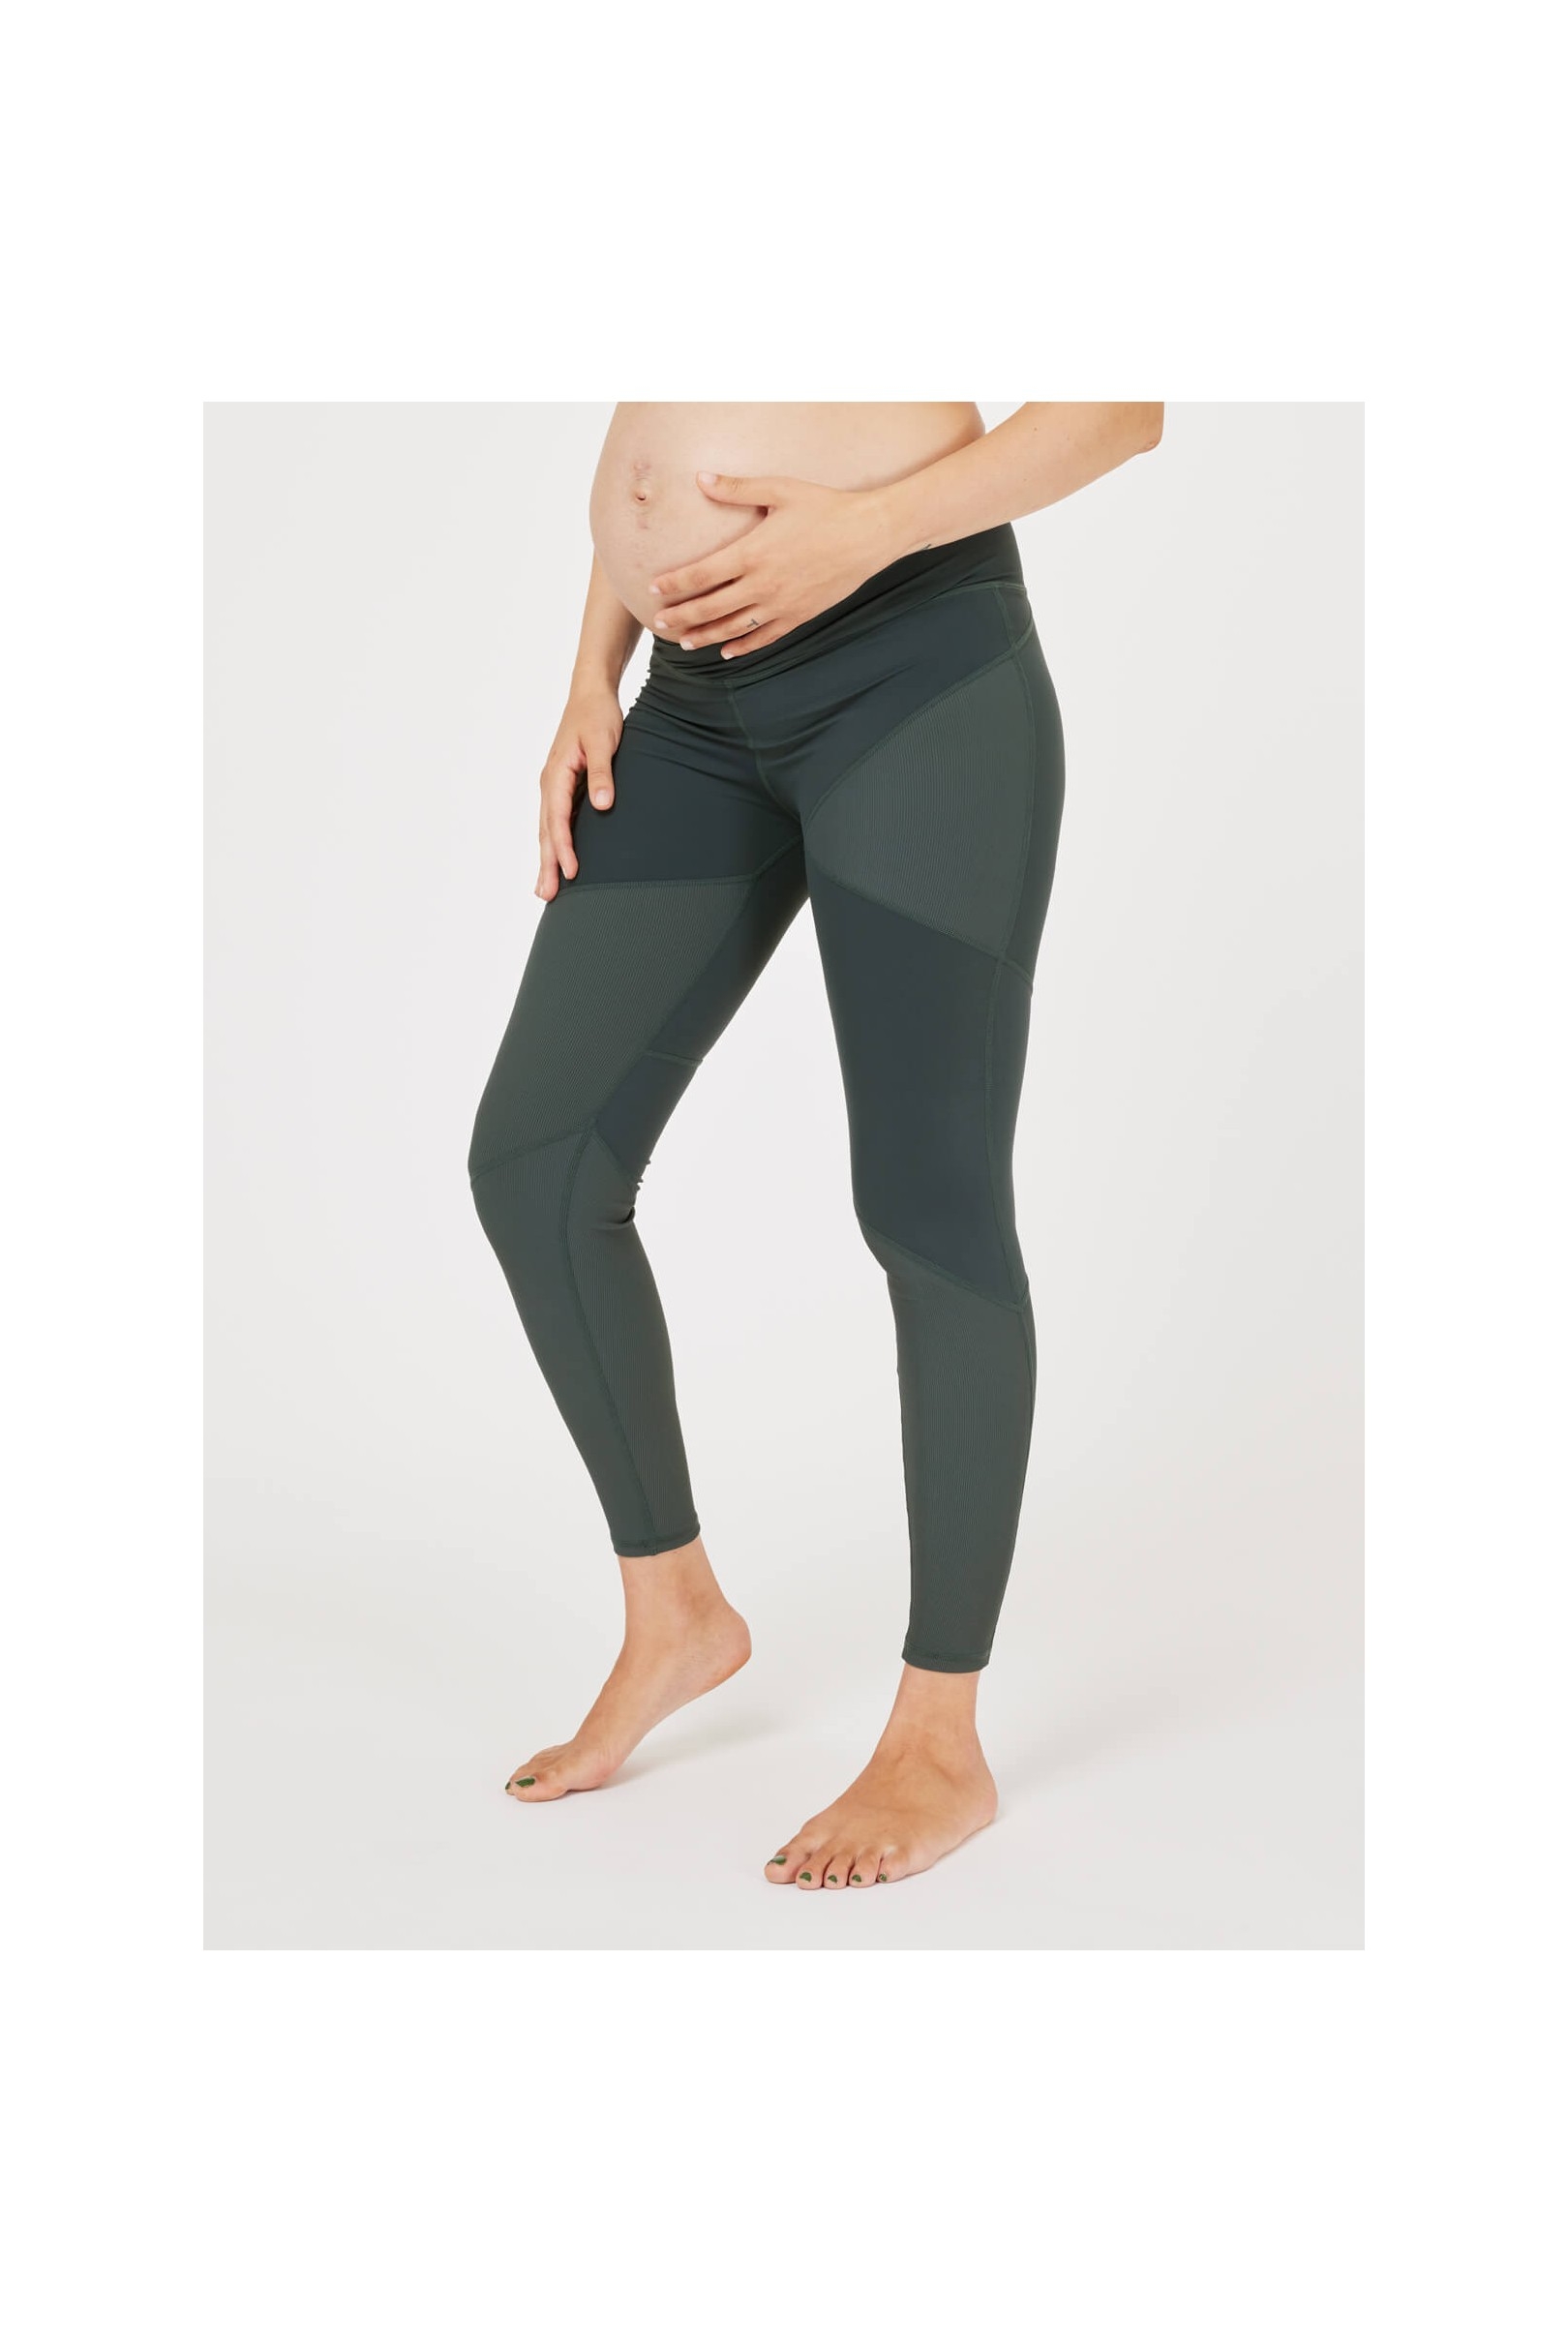 Lululemon leggings - similar to 'Fast and Free' running tights, Women's  Fashion, Activewear on Carousell